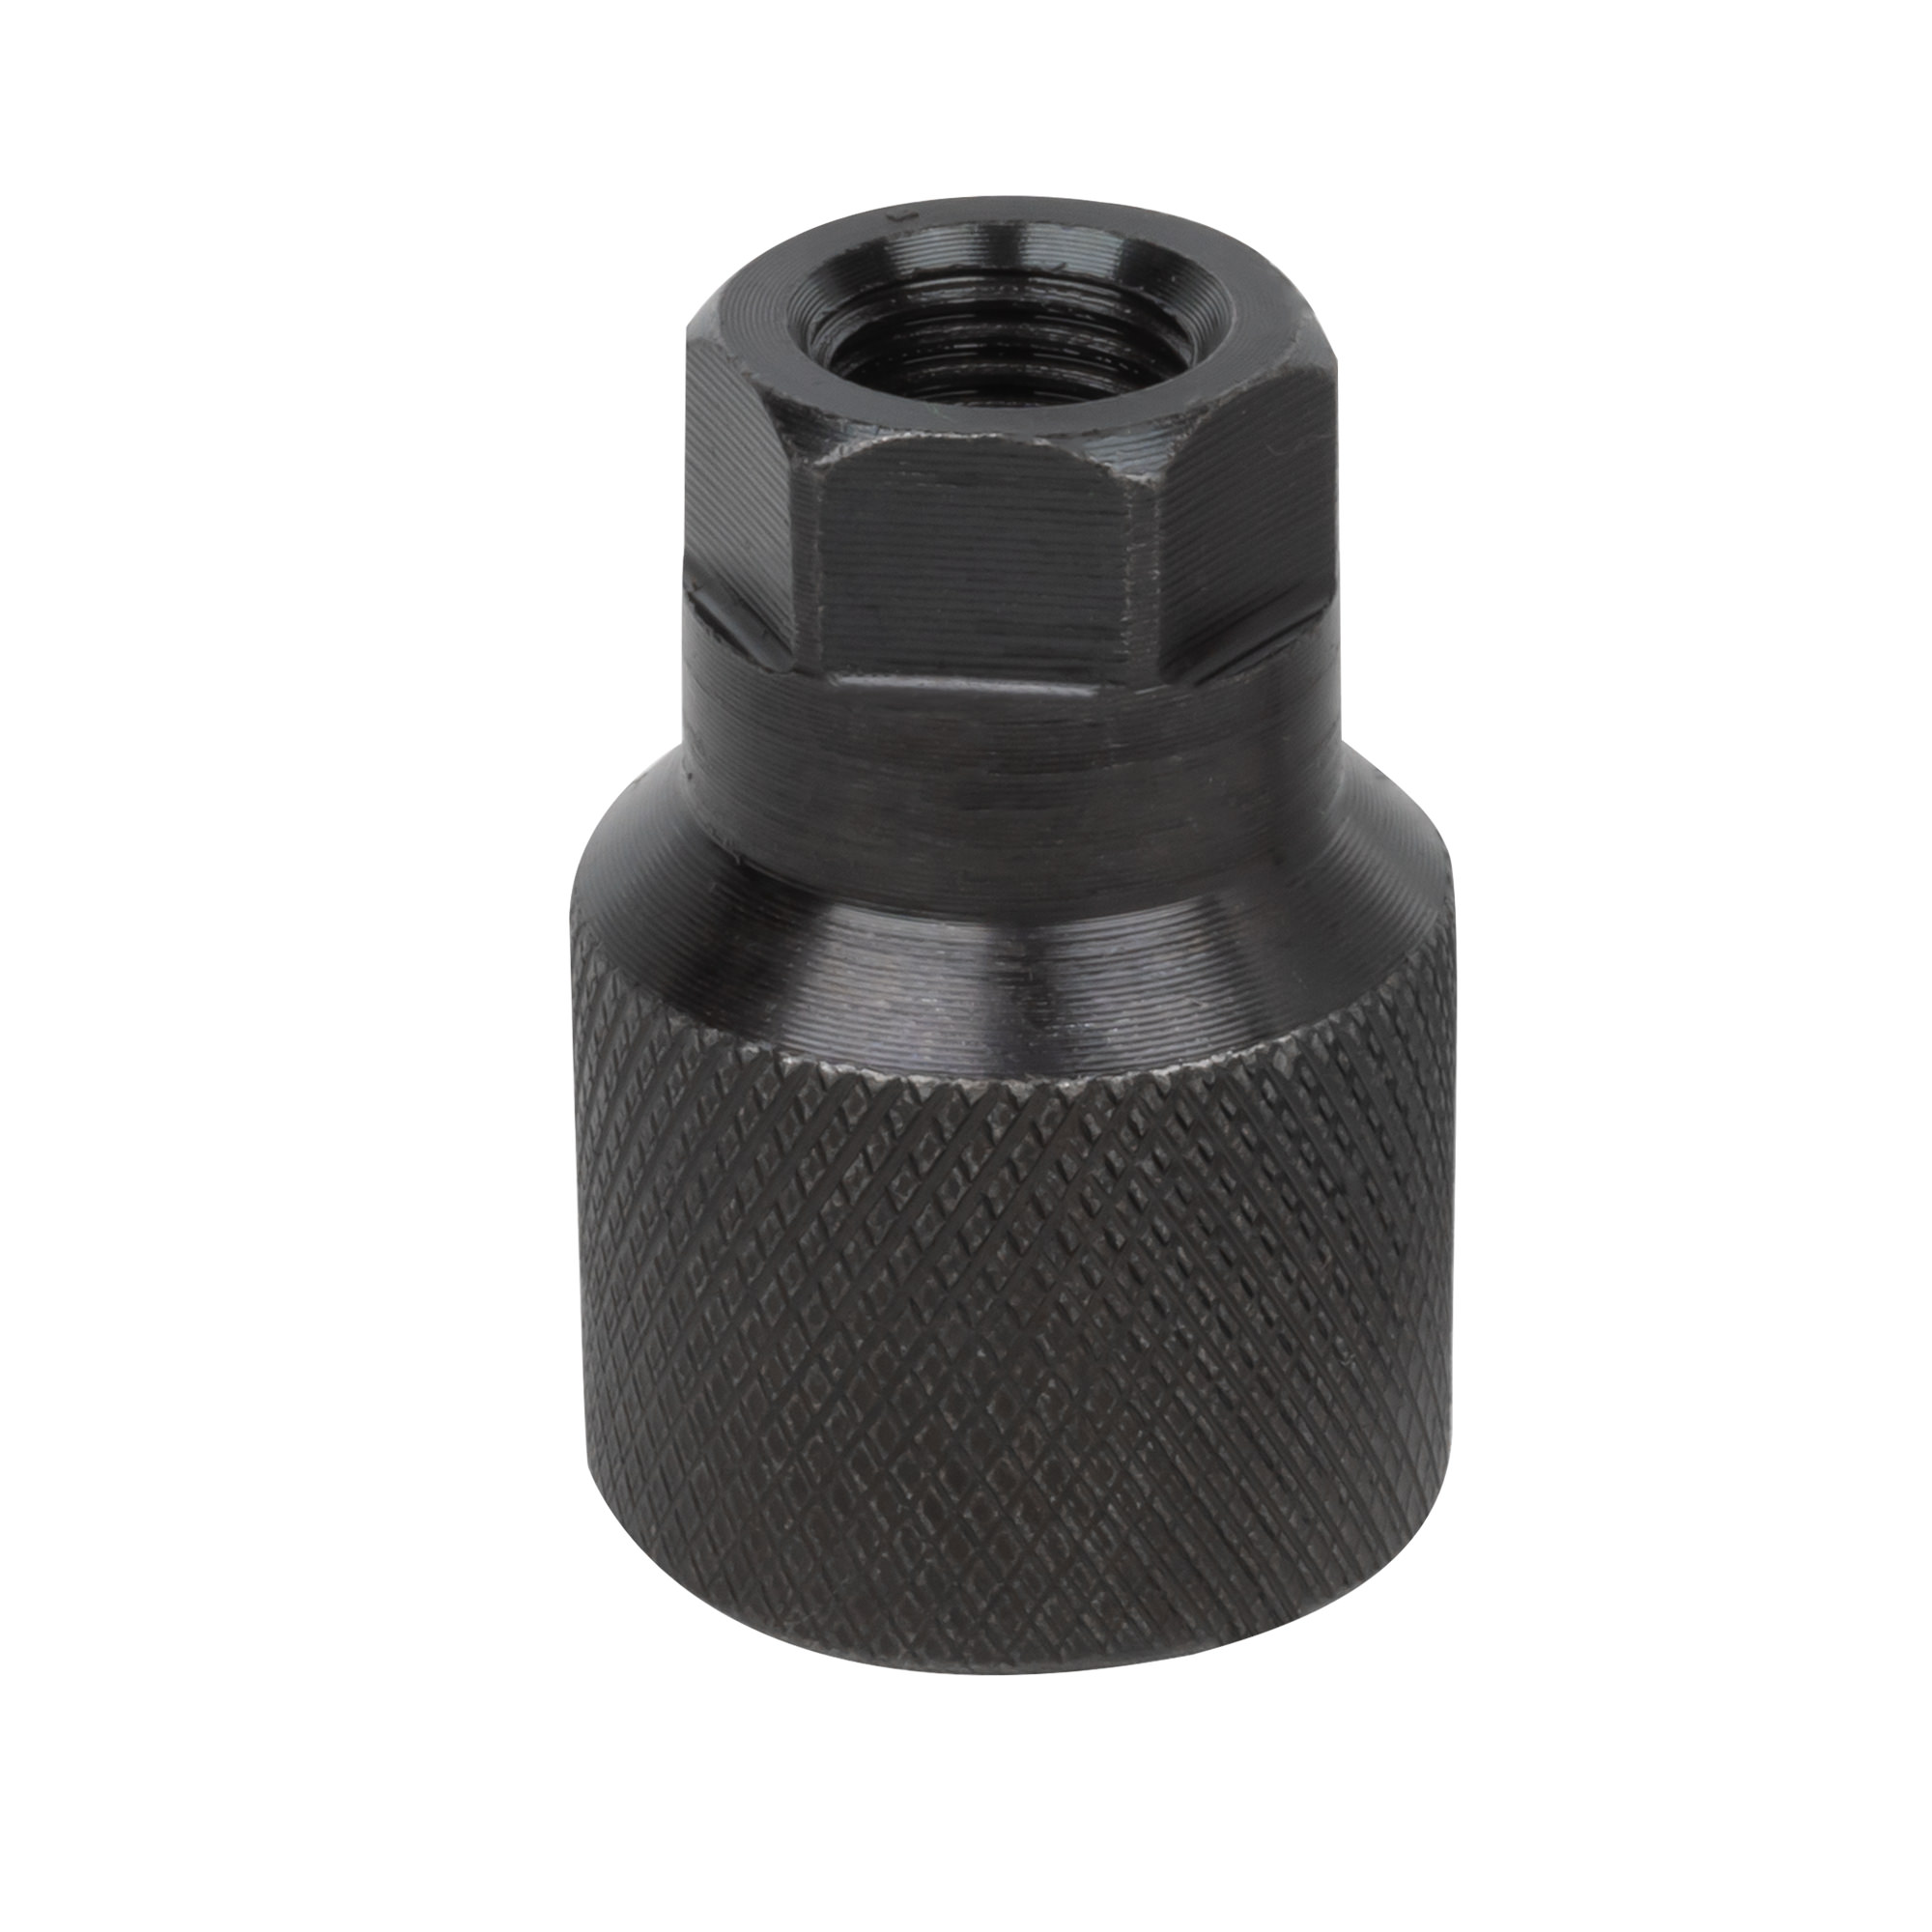 ADAPTER M25X0,5 9MM FOR INJECTOR PULLER 54186